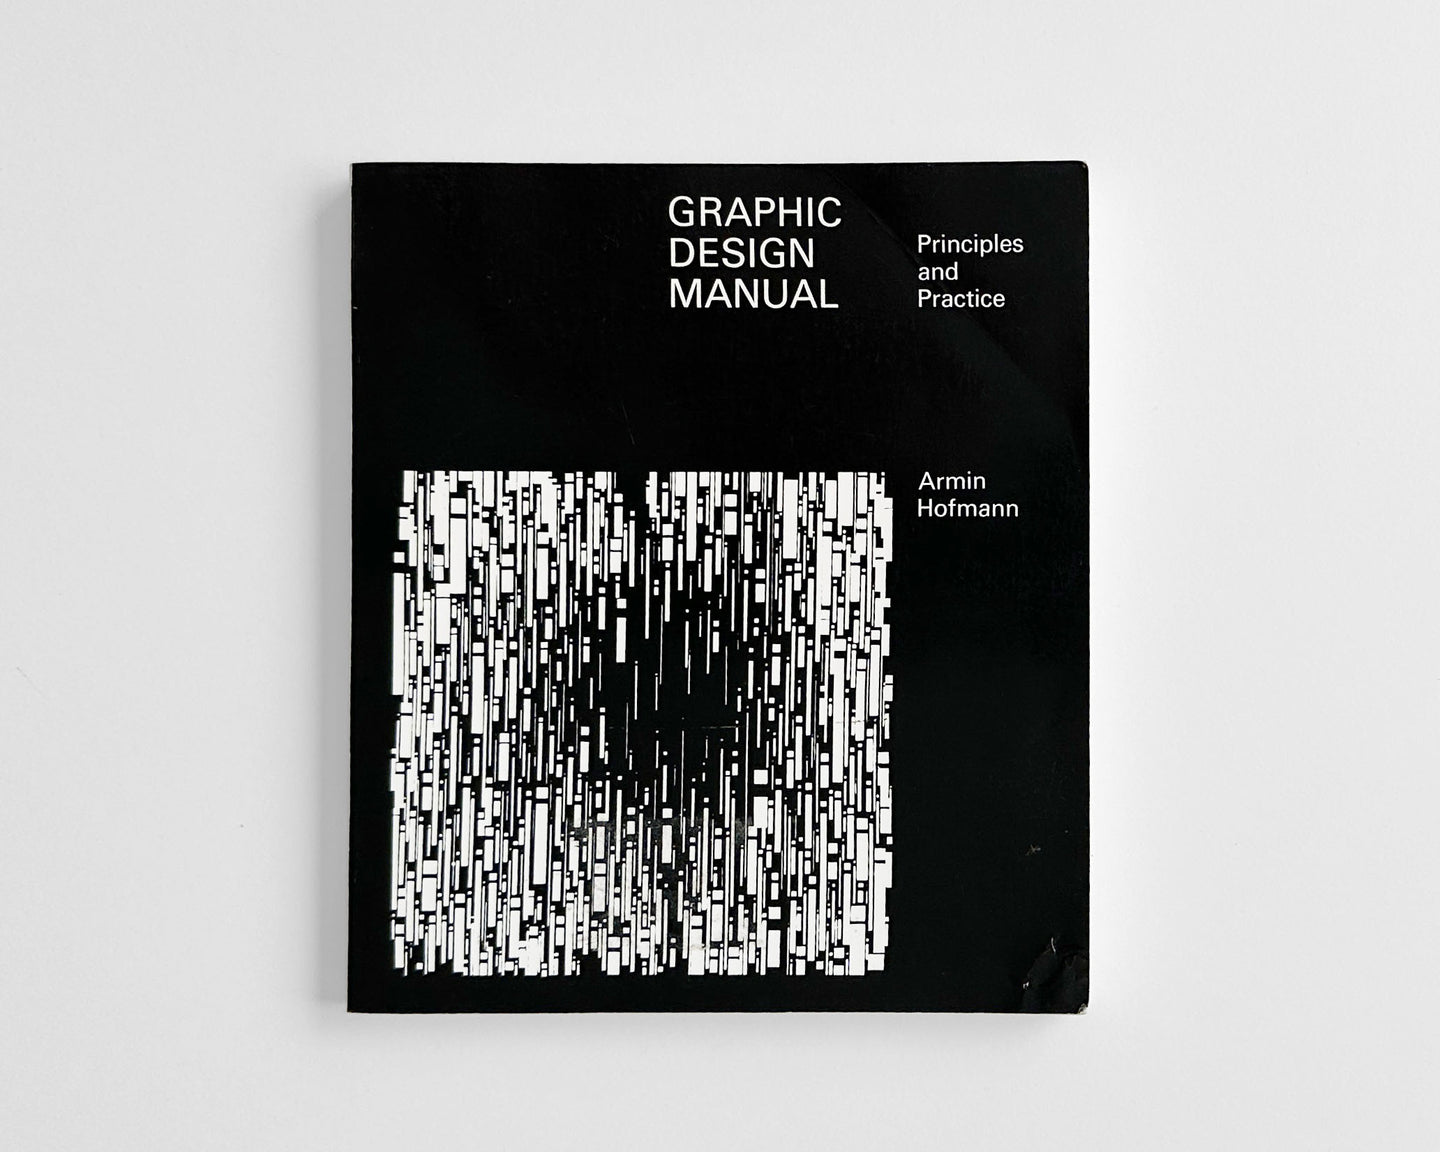 Graphic Design Manual: Principles and Practice [Armin Hofmann, Softcover]